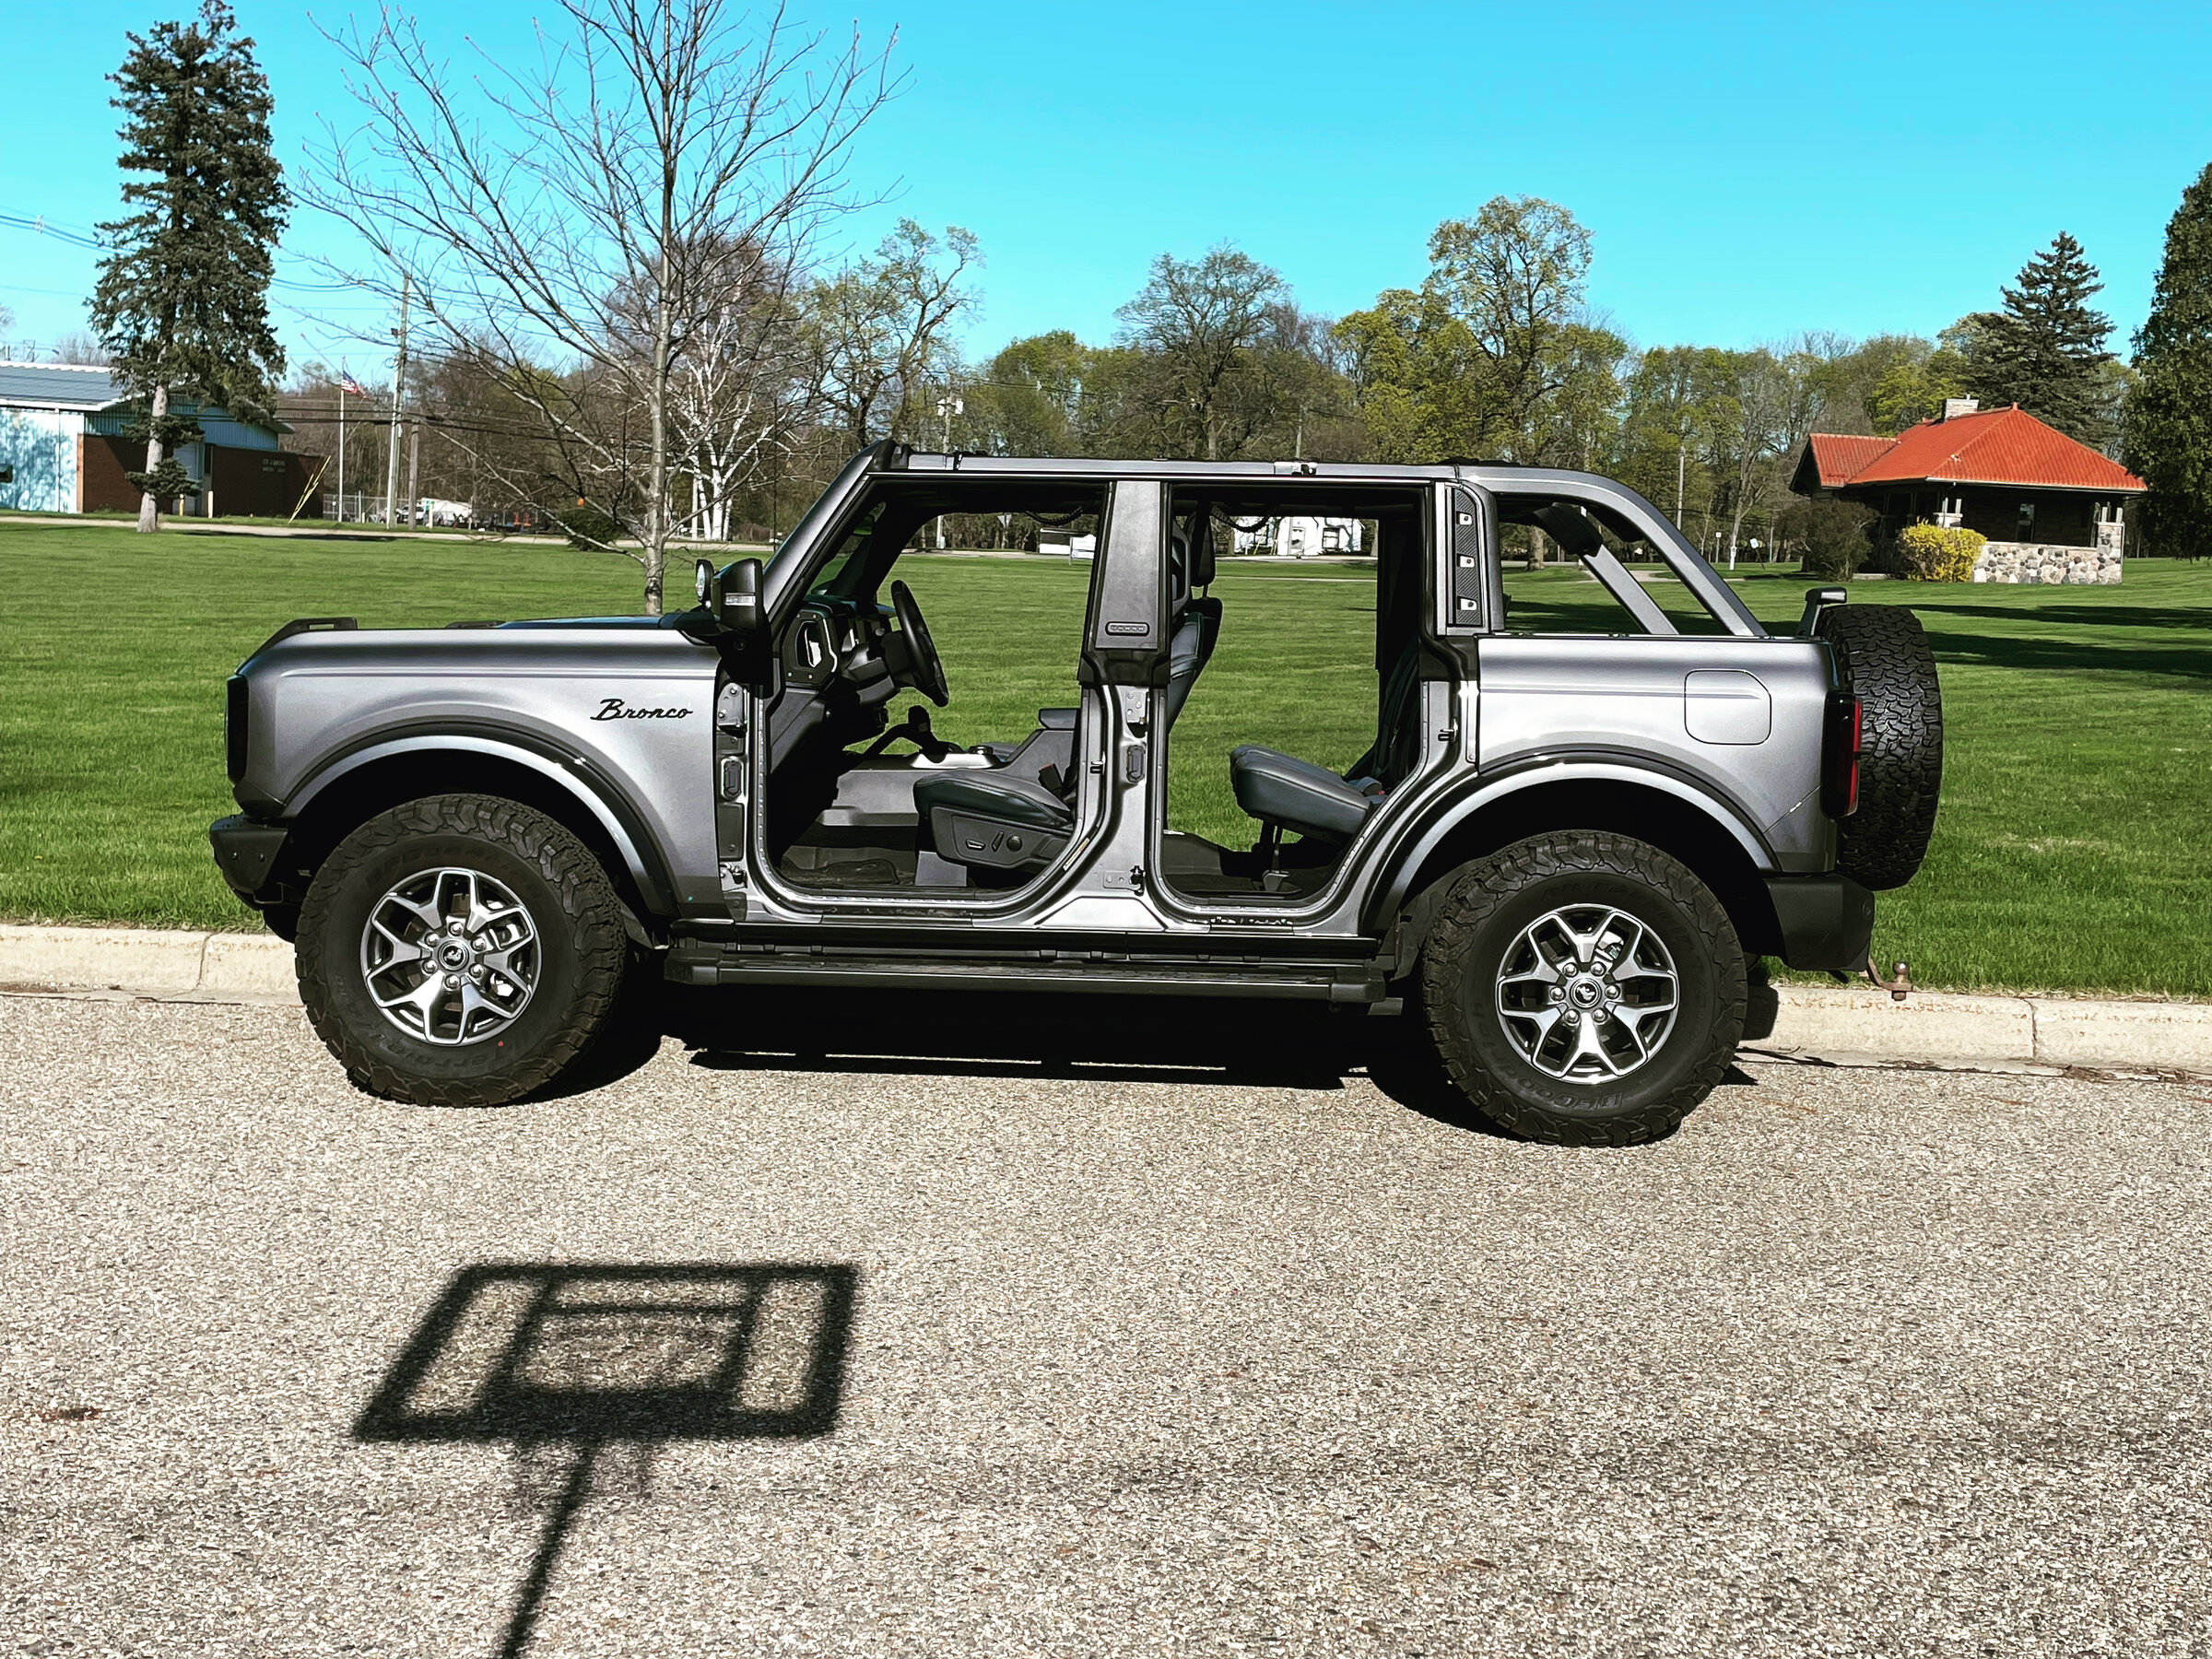 Ford Bronco Let’s see your doors off pics… D3C59AA4-462D-47CE-B244-BC5513905B9E